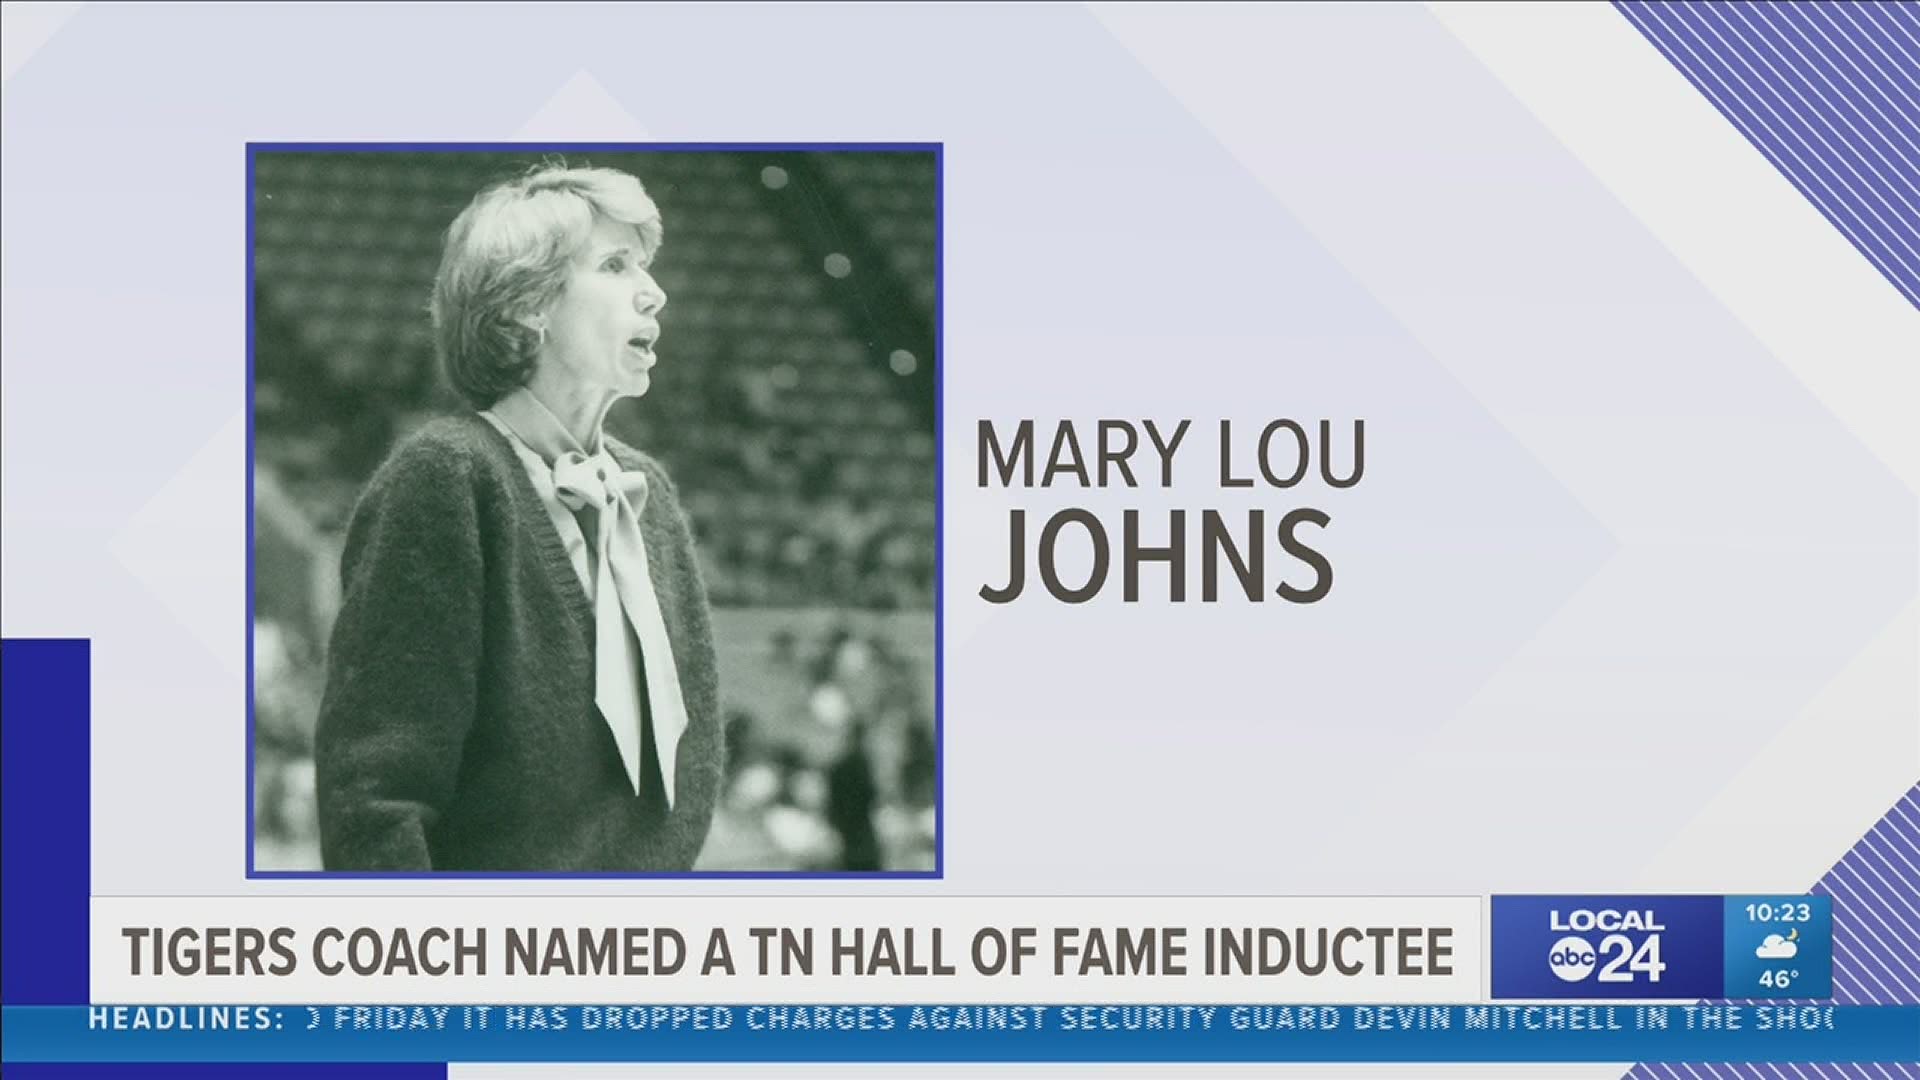 Mary Lou Johns is one of the pioneers in women’s college basketball and the all-time winningest head coach in University of Memphis women’s basketball history.